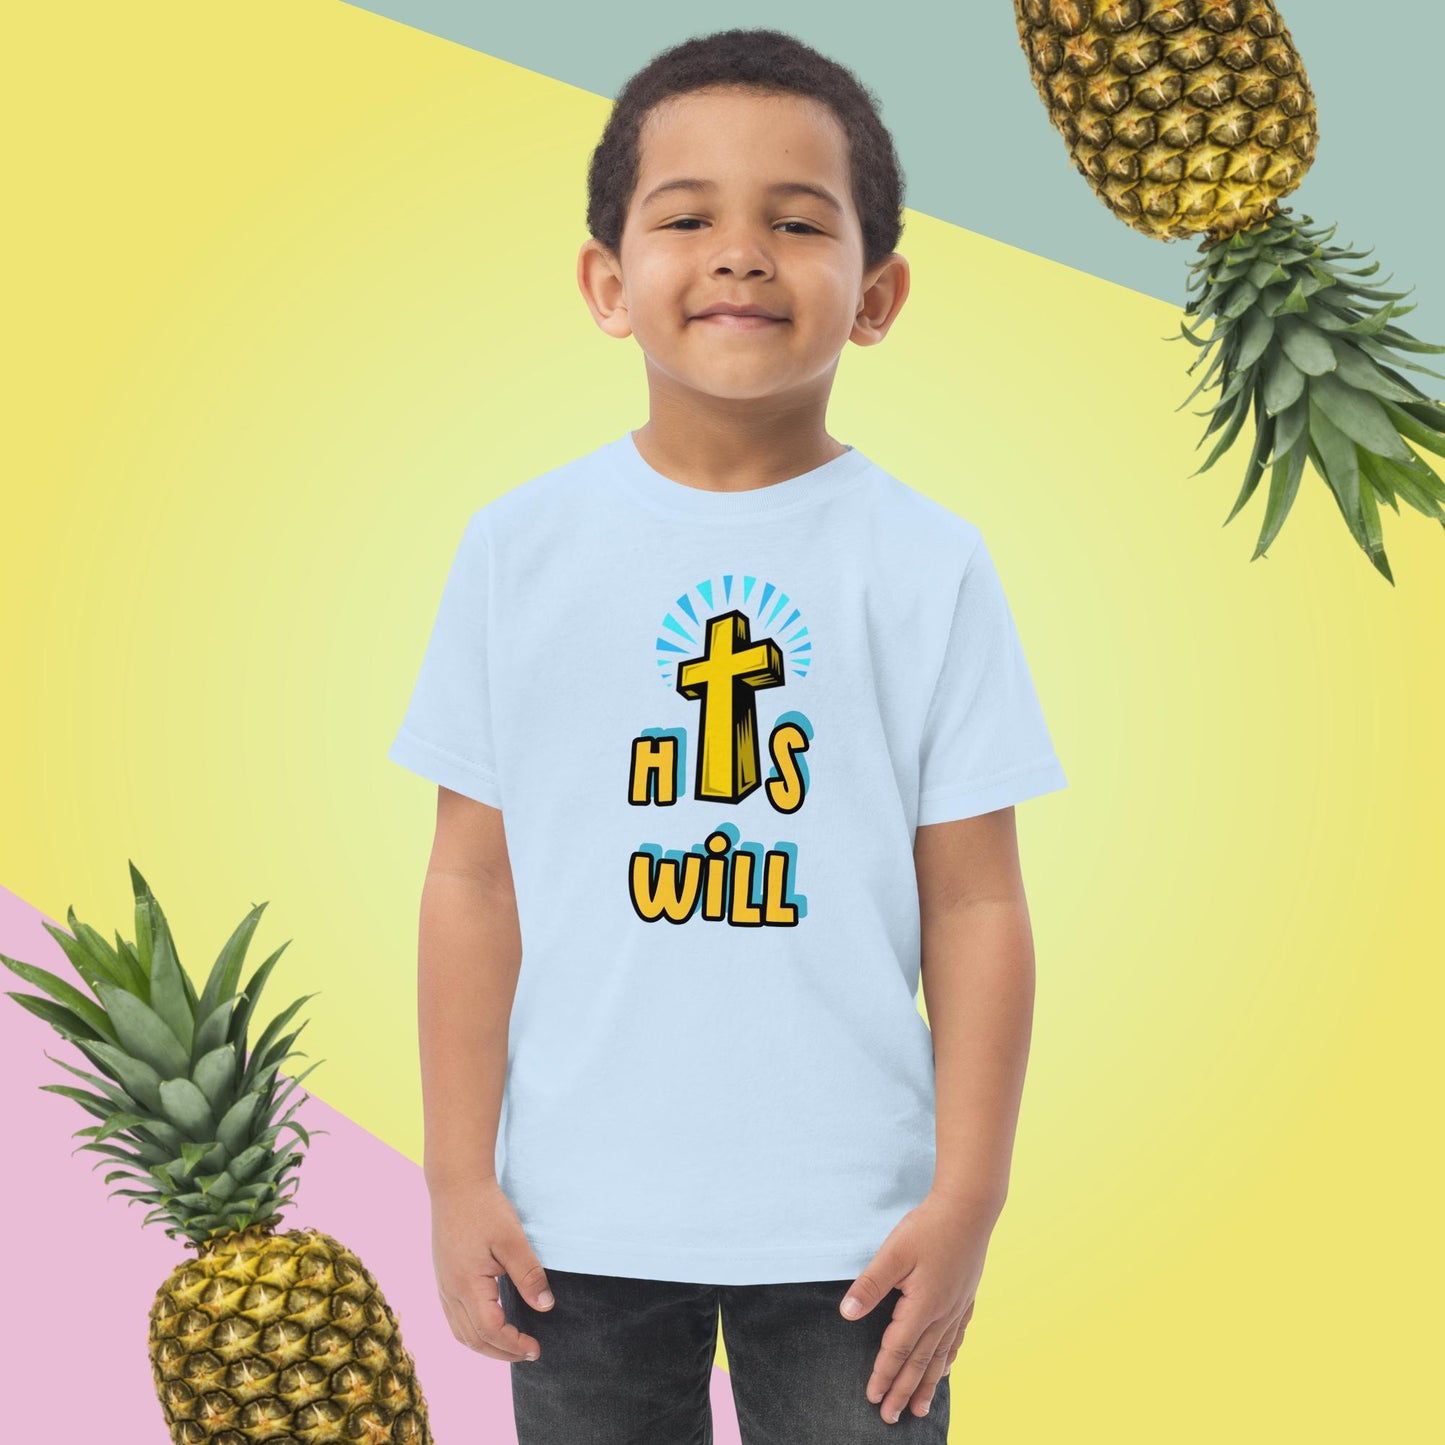 "HIS WILL" Toddler jersey t-shirt